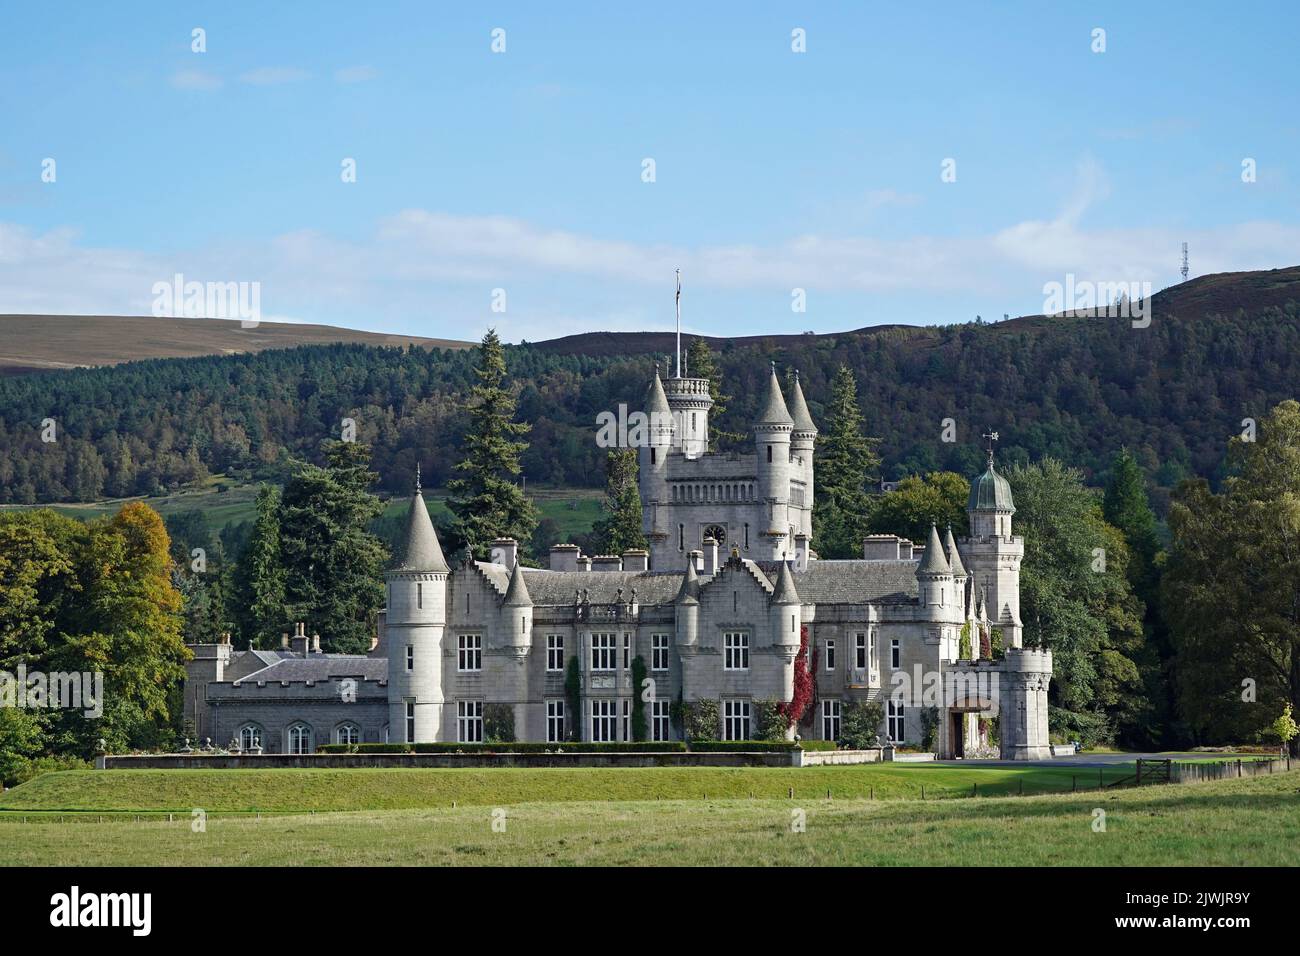 File photo dated 01/10/21 of a general view of Balmoral Castle, which is one of the residences of the Royal family, and where Queen Elizabeth II traditionally spends the summer months. The Queen is said to never be happier than when she is staying on her beloved Balmoral estate. Balmoral Castle -her private Scottish home in Aberdeenshire -was handed down to her through generations of royals after being bought for Queen Victoria by Prince Albert in 1852. Victoria described Balmoral as her 'Heaven on Earth', and it is where she sought solace after Albert's death. The turreted grey stone castle b Stock Photo